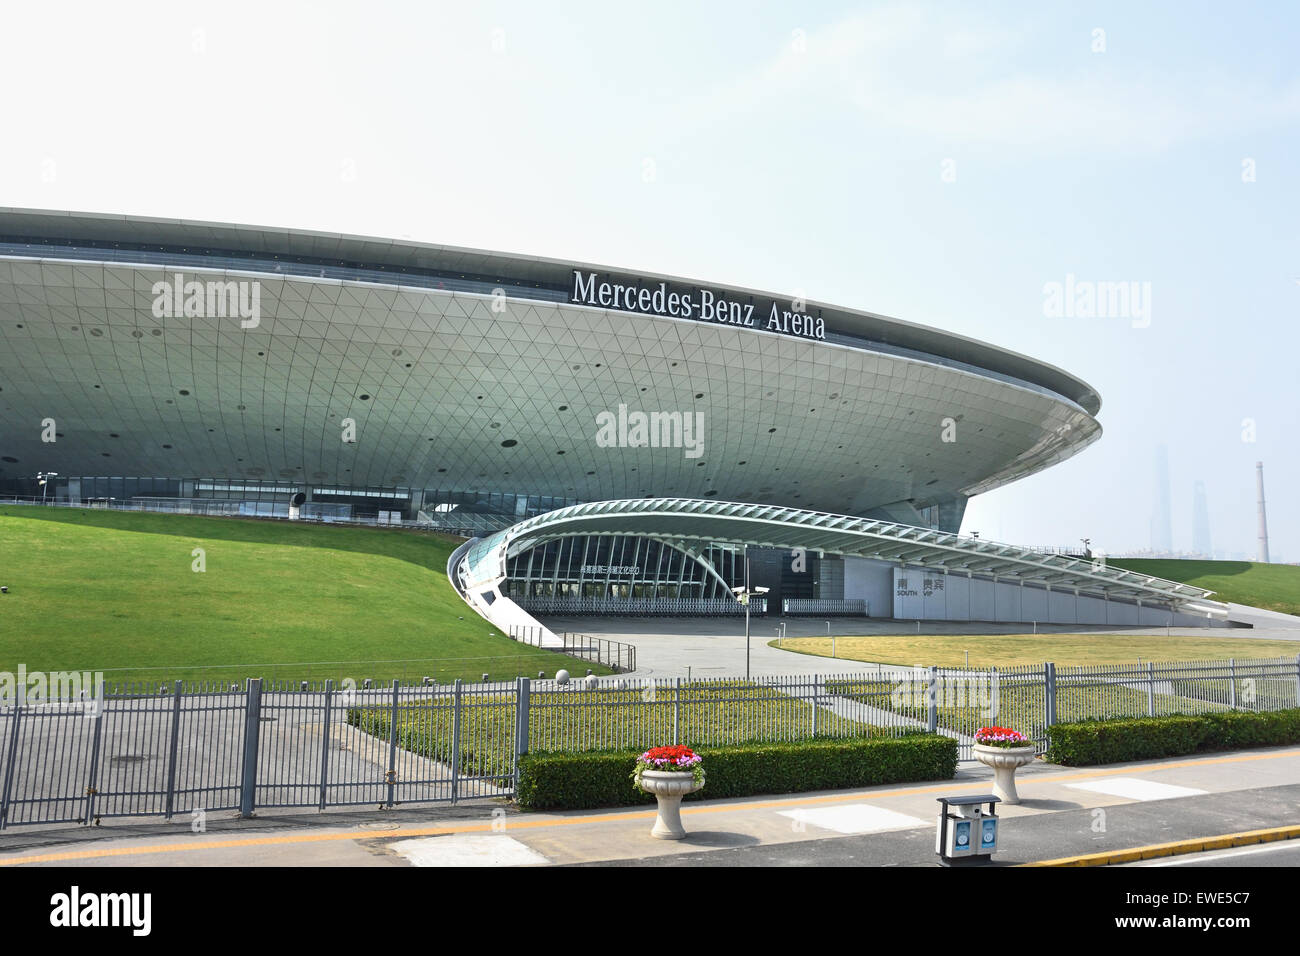 Mercedes Benz Arena Pudong Shanghai Chine Chinese Banque D'Images